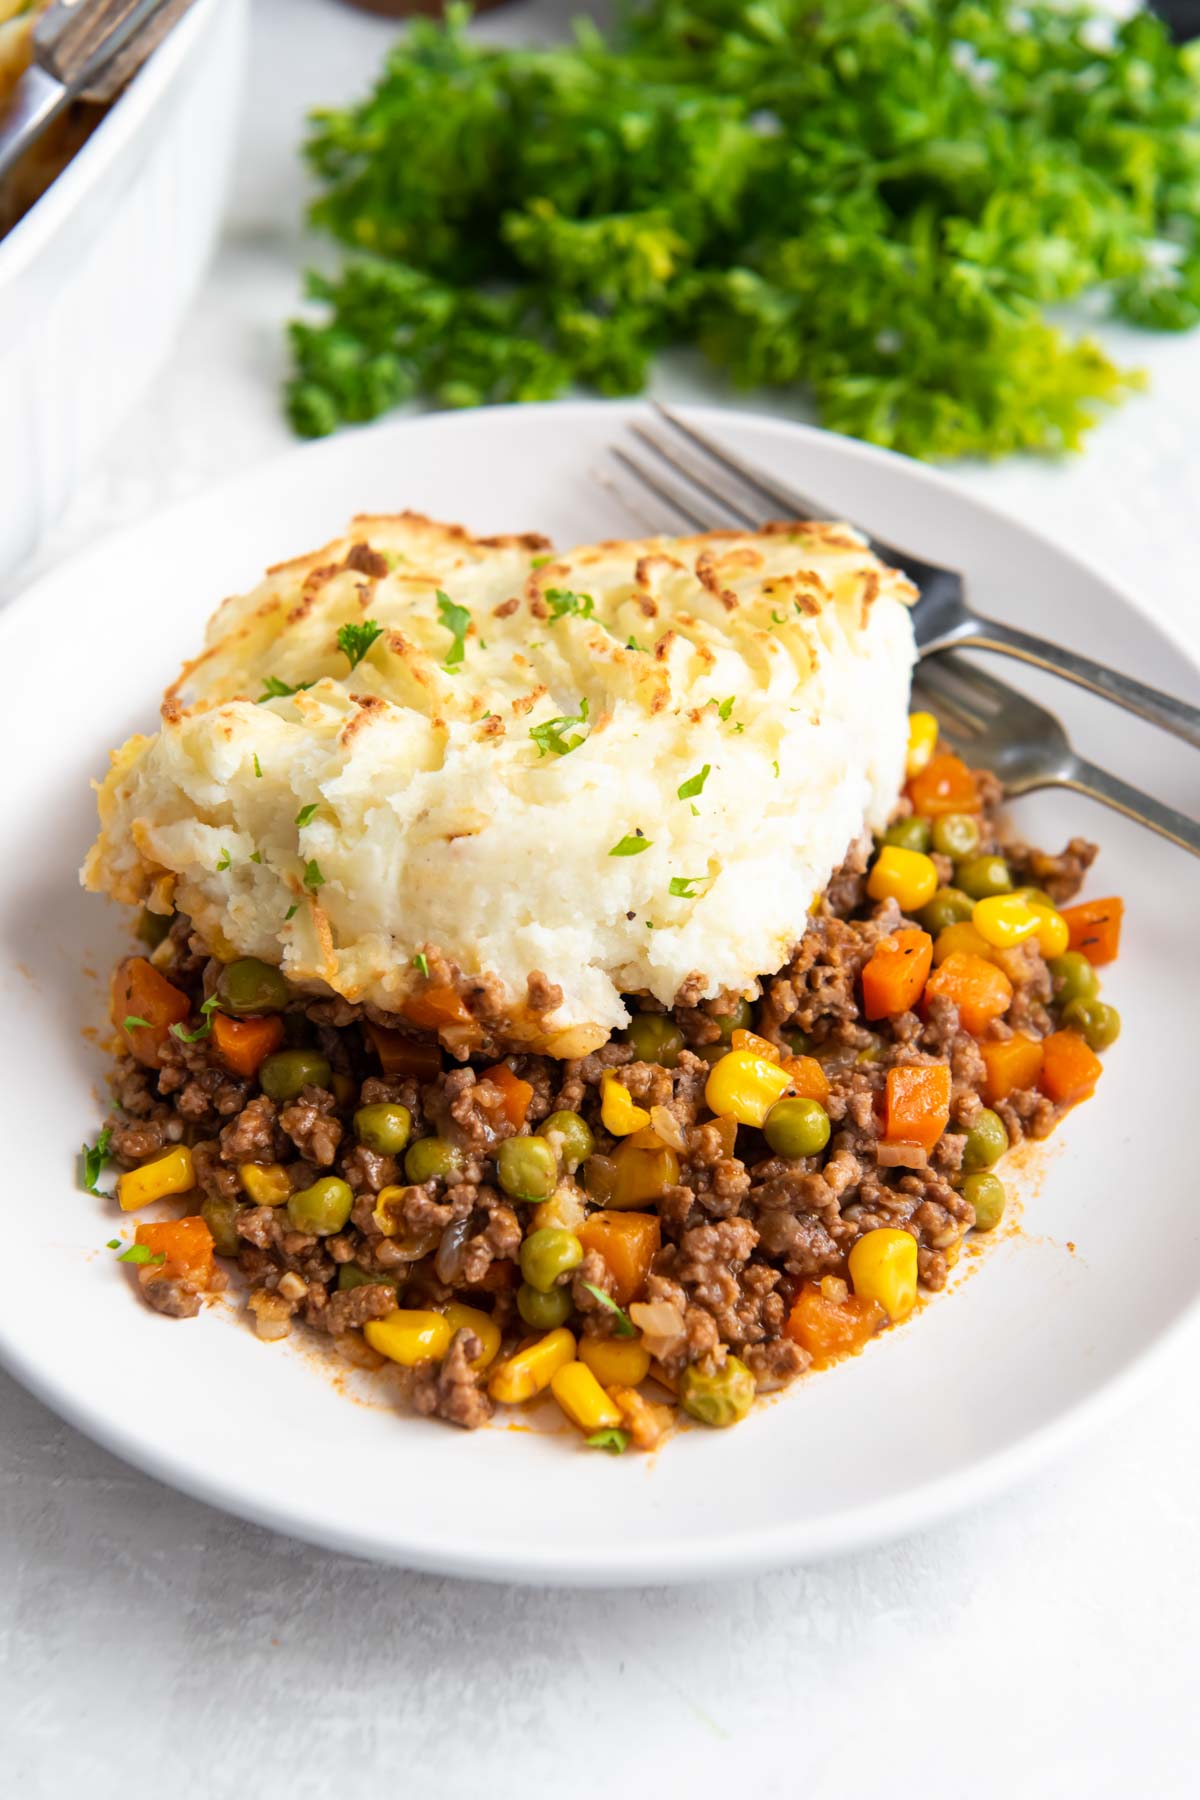 Serving of shepherd's pie on a small white plate.